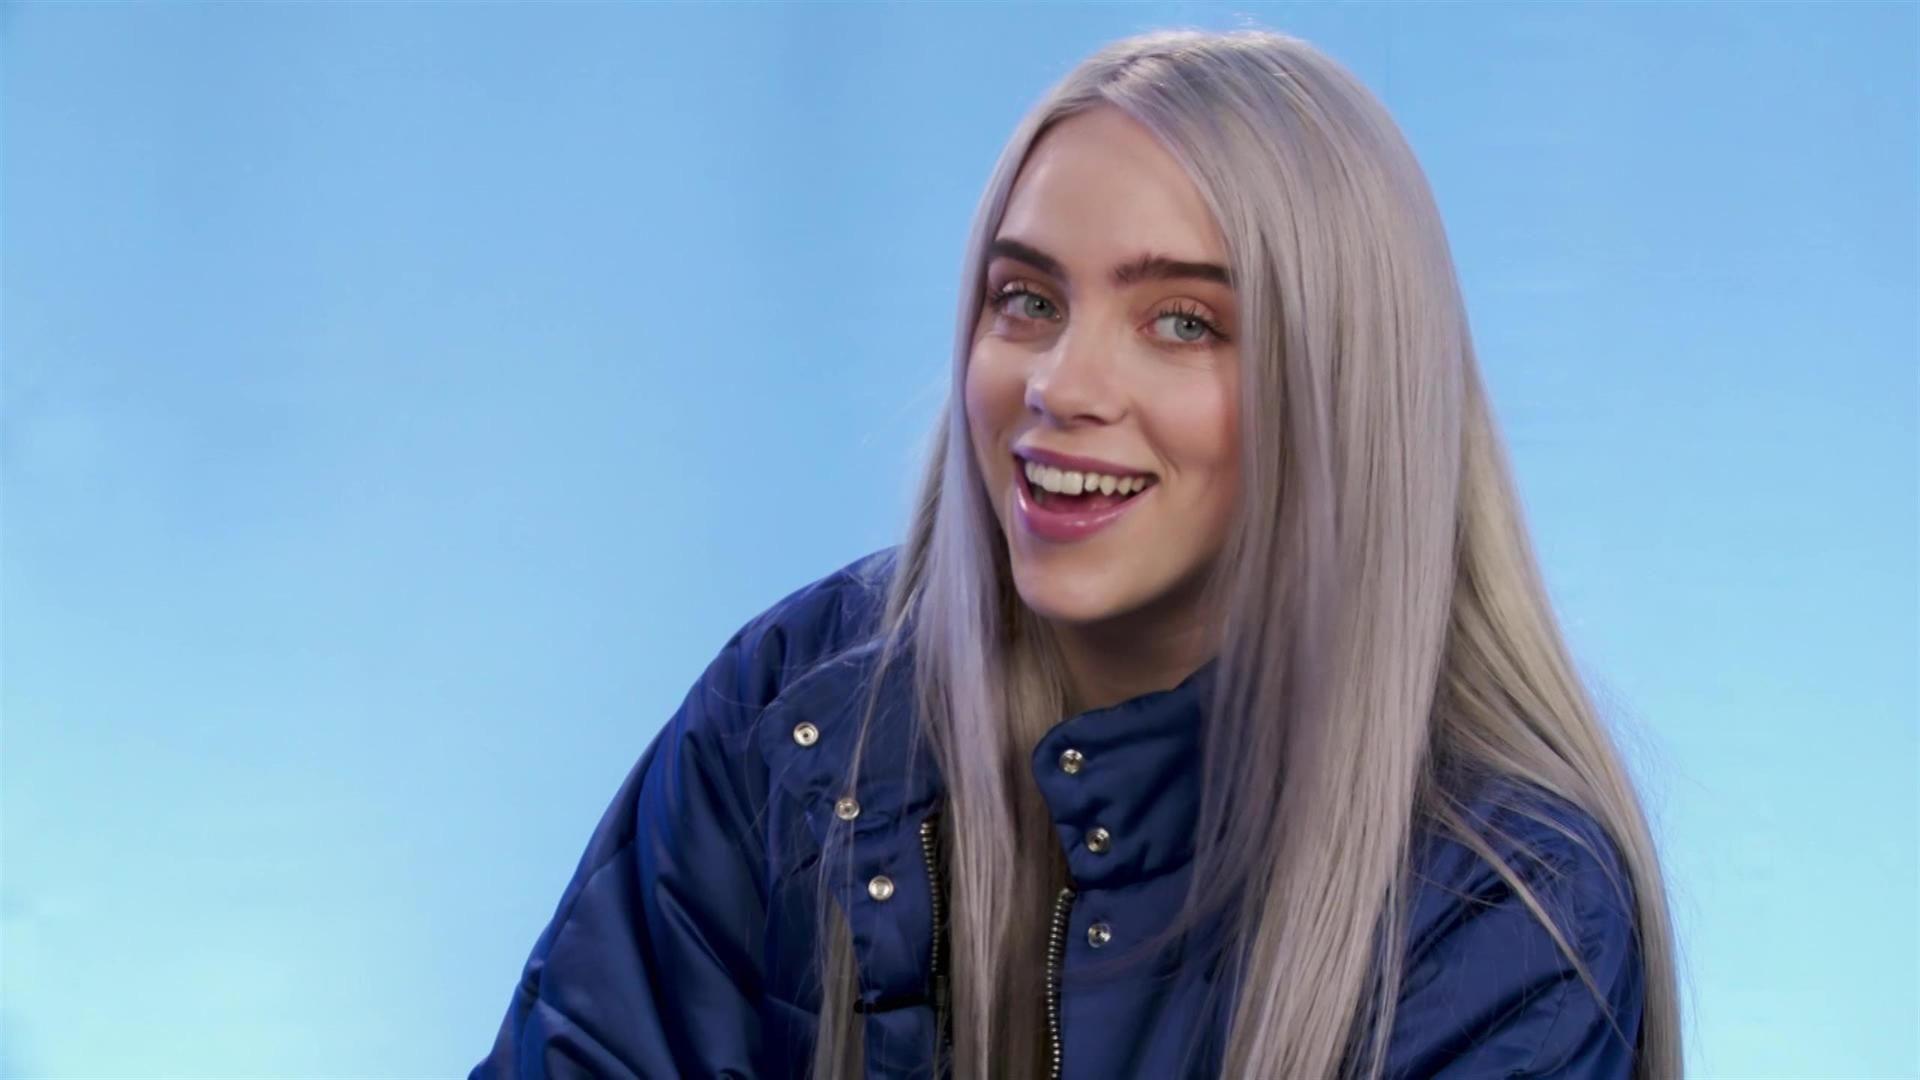 Billie Eilish Talks Hopes to Work With Tyler, The Creator, 'Don't